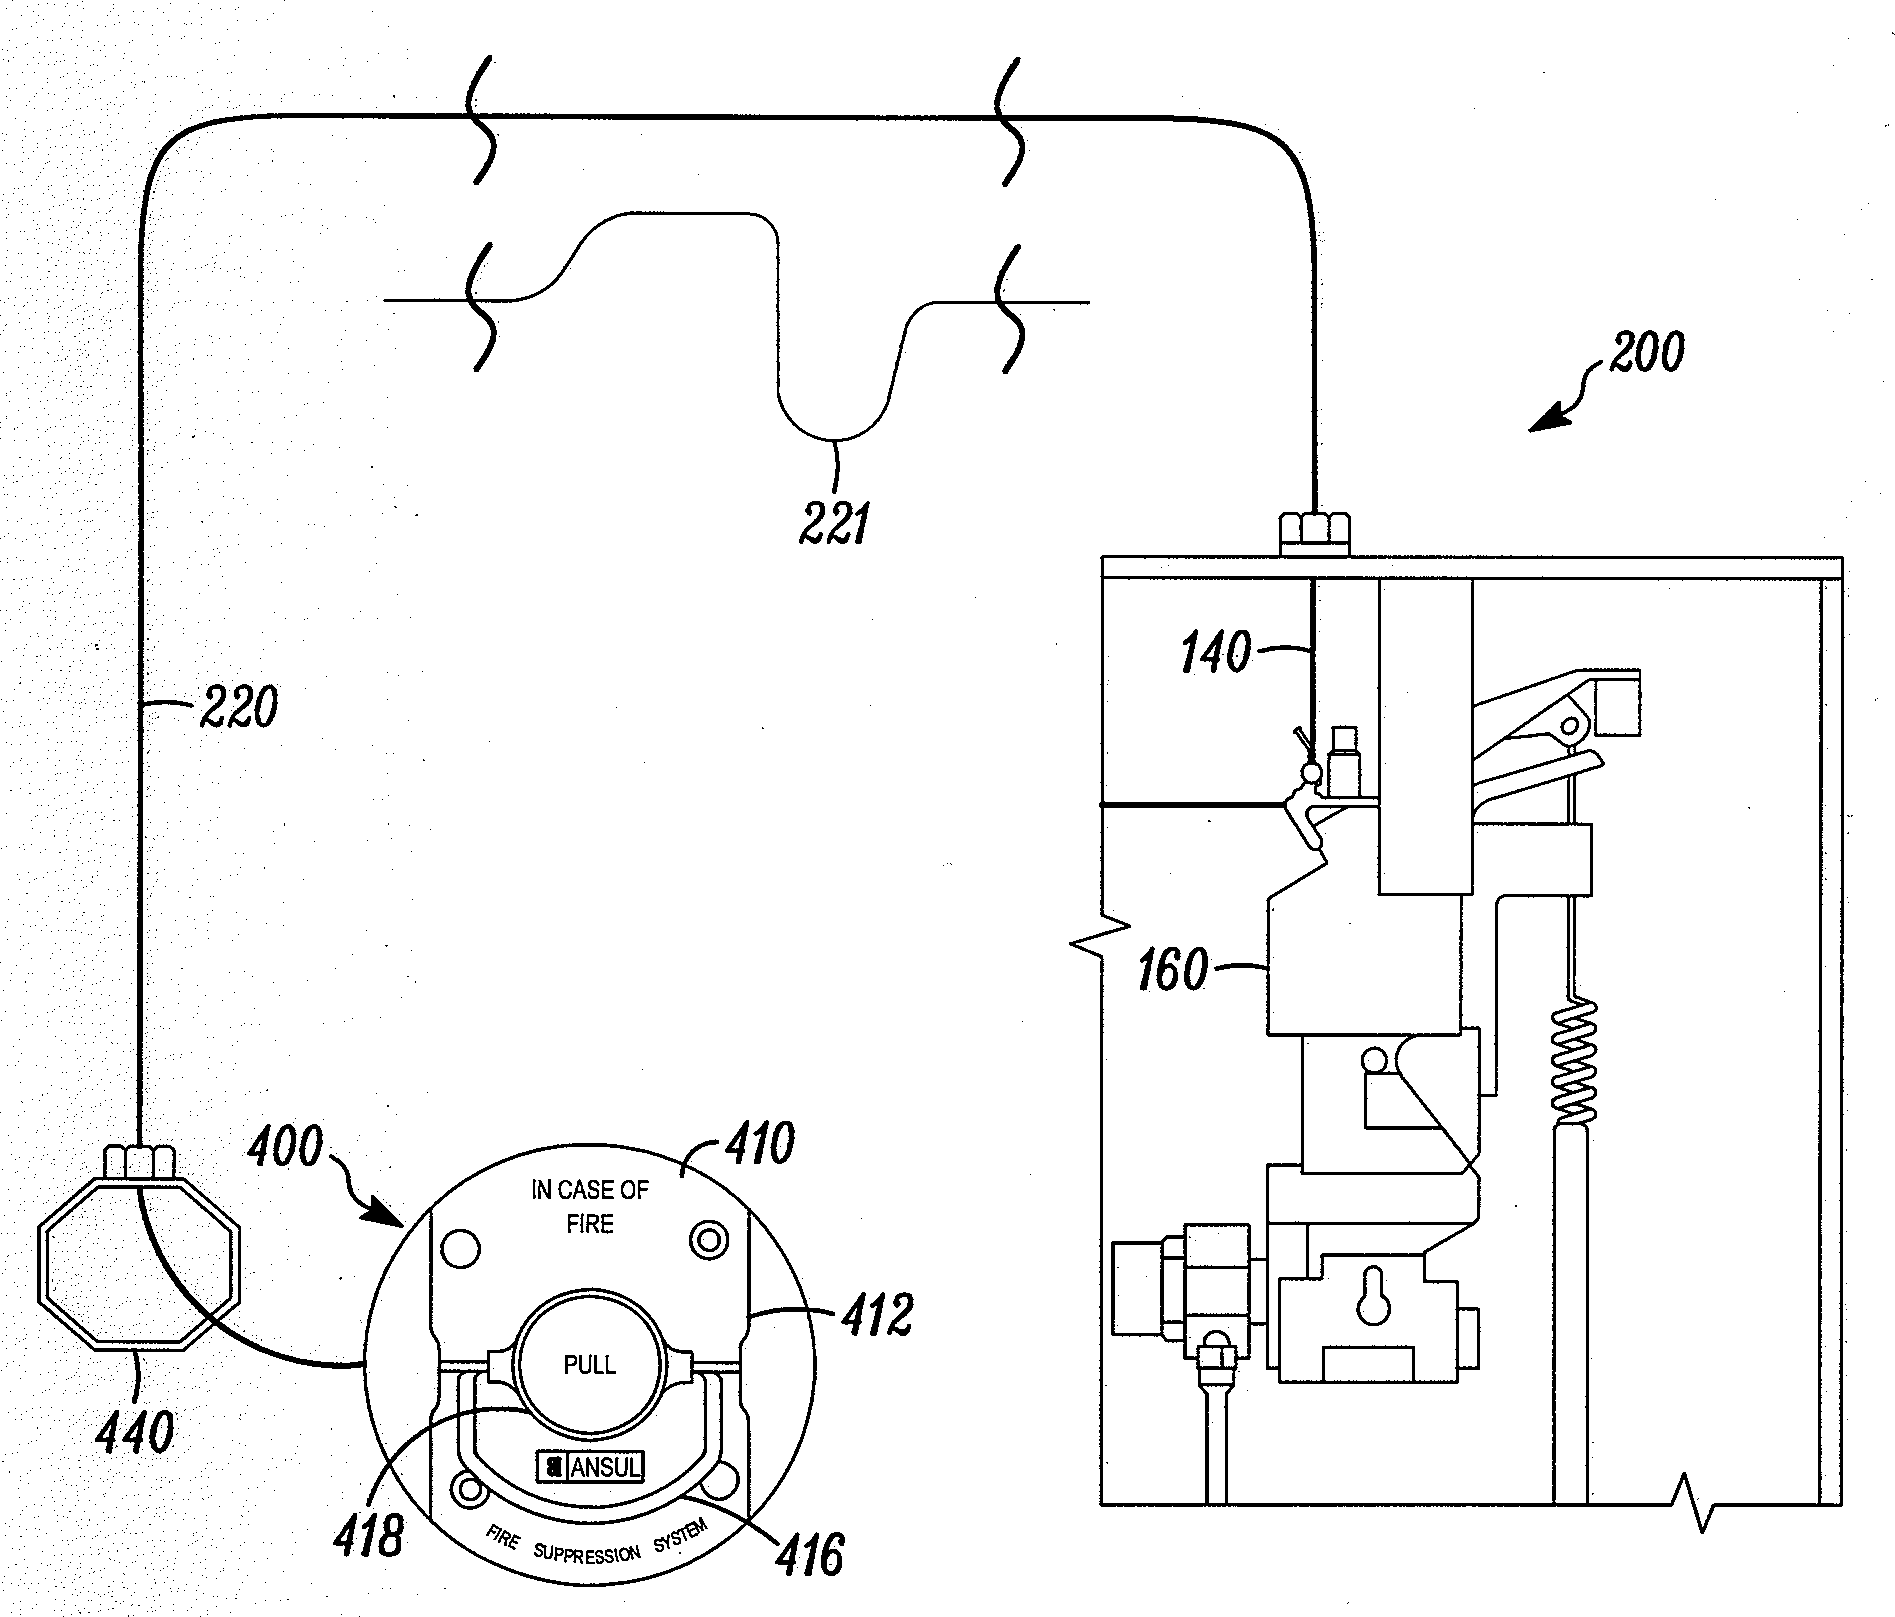 Fire Suppression System and Emergency Annunciation System